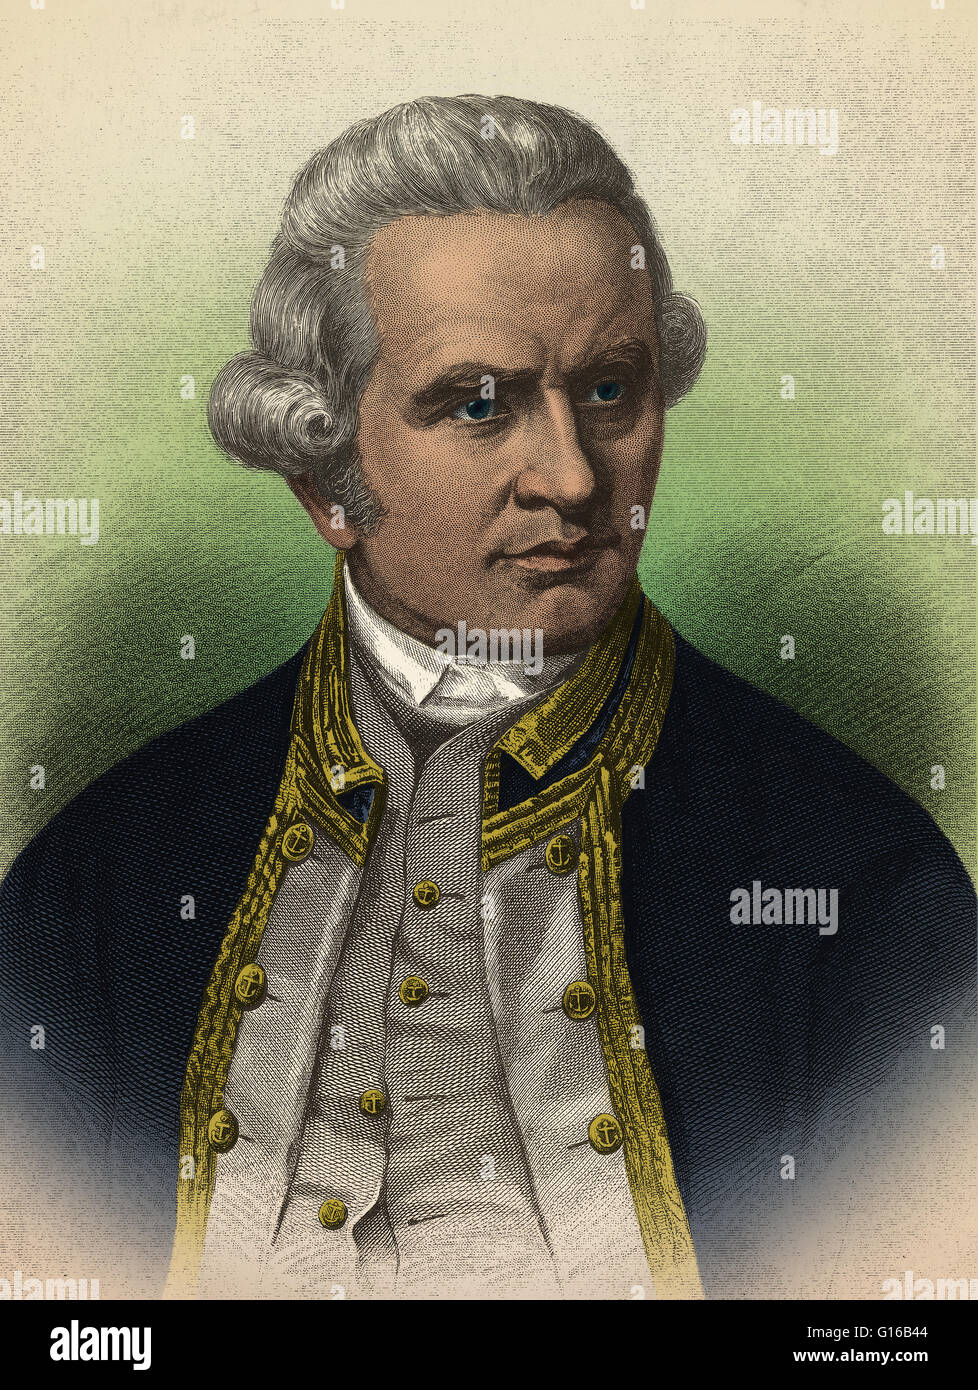 Captain James Cook (1728-1779), British explorer. After joining the Royal Navy, Cook undertook his first major voyage from 1768-71, accurately mapping New Zealand's coastline and making the first European landing in east Australia. During 1772-75 he cross Stock Photo